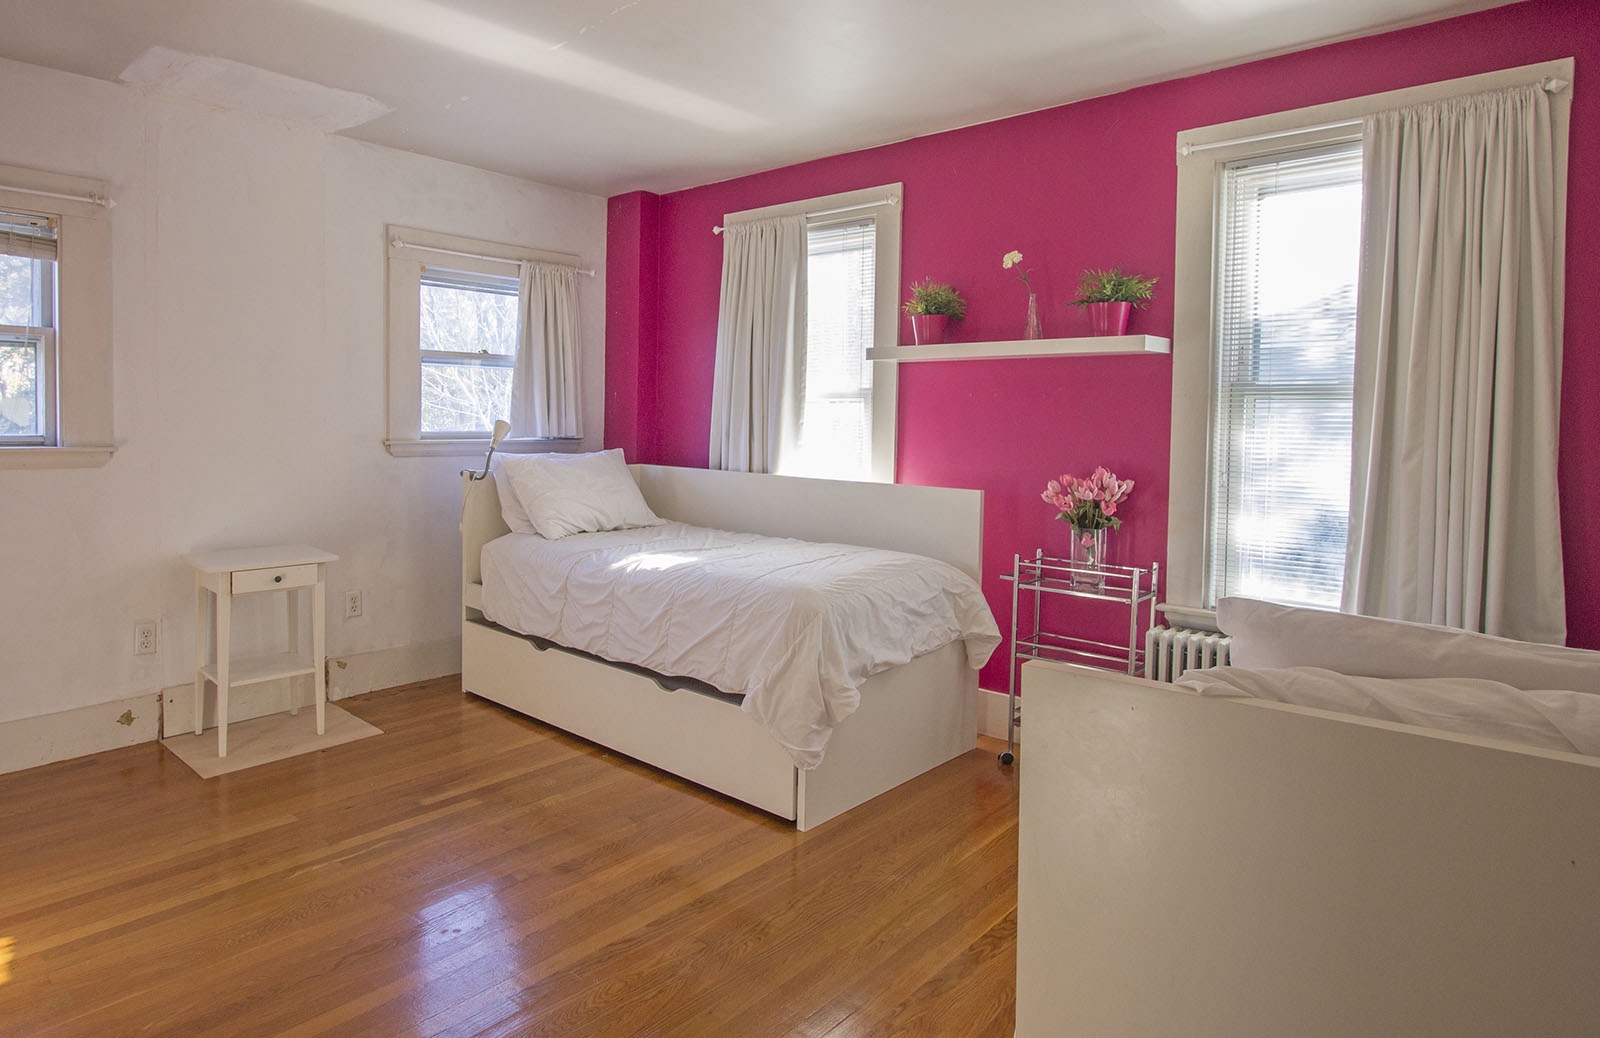 BR 3: A bright and sunny corner bedroom with twin beds.